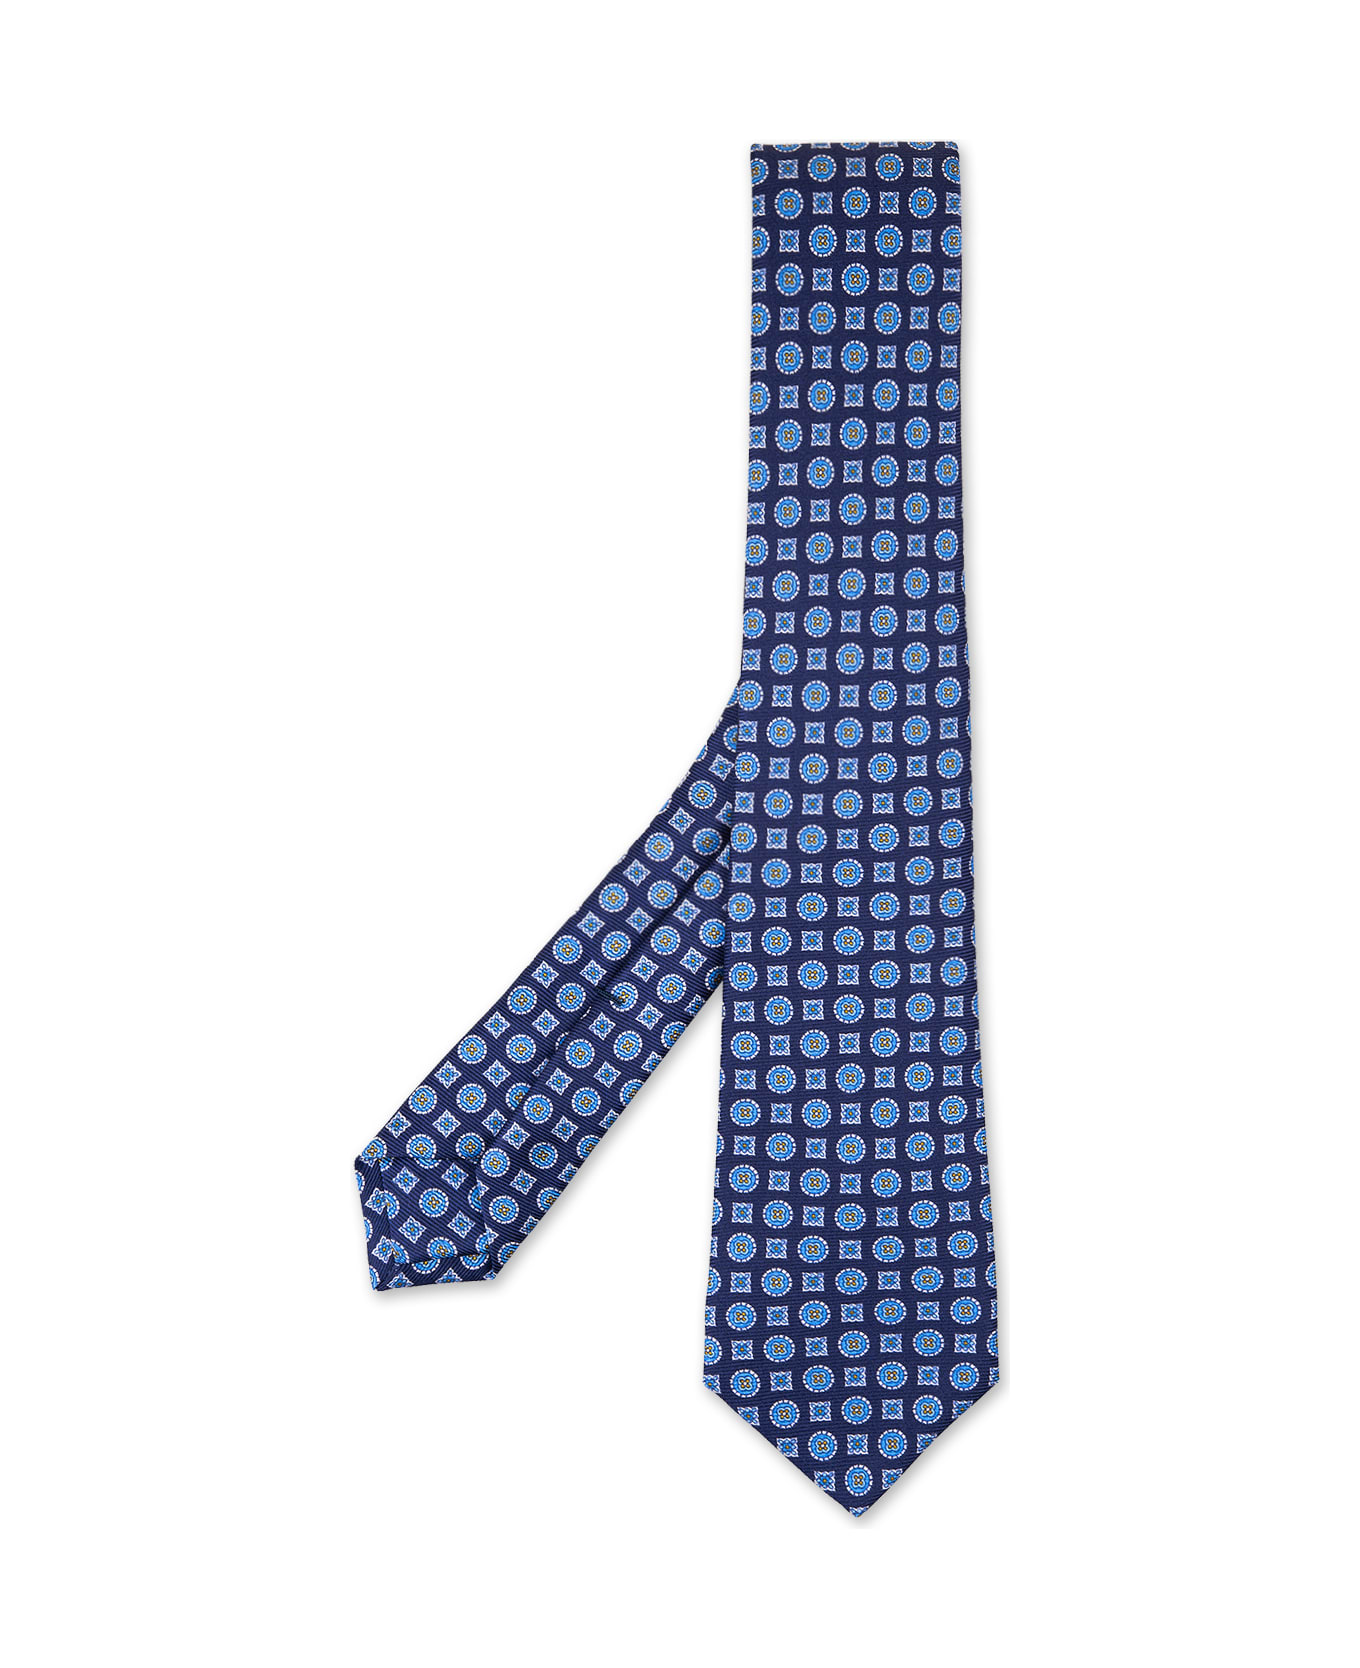 Kiton Blue Tie With Micro Pattern - Blue ネクタイ